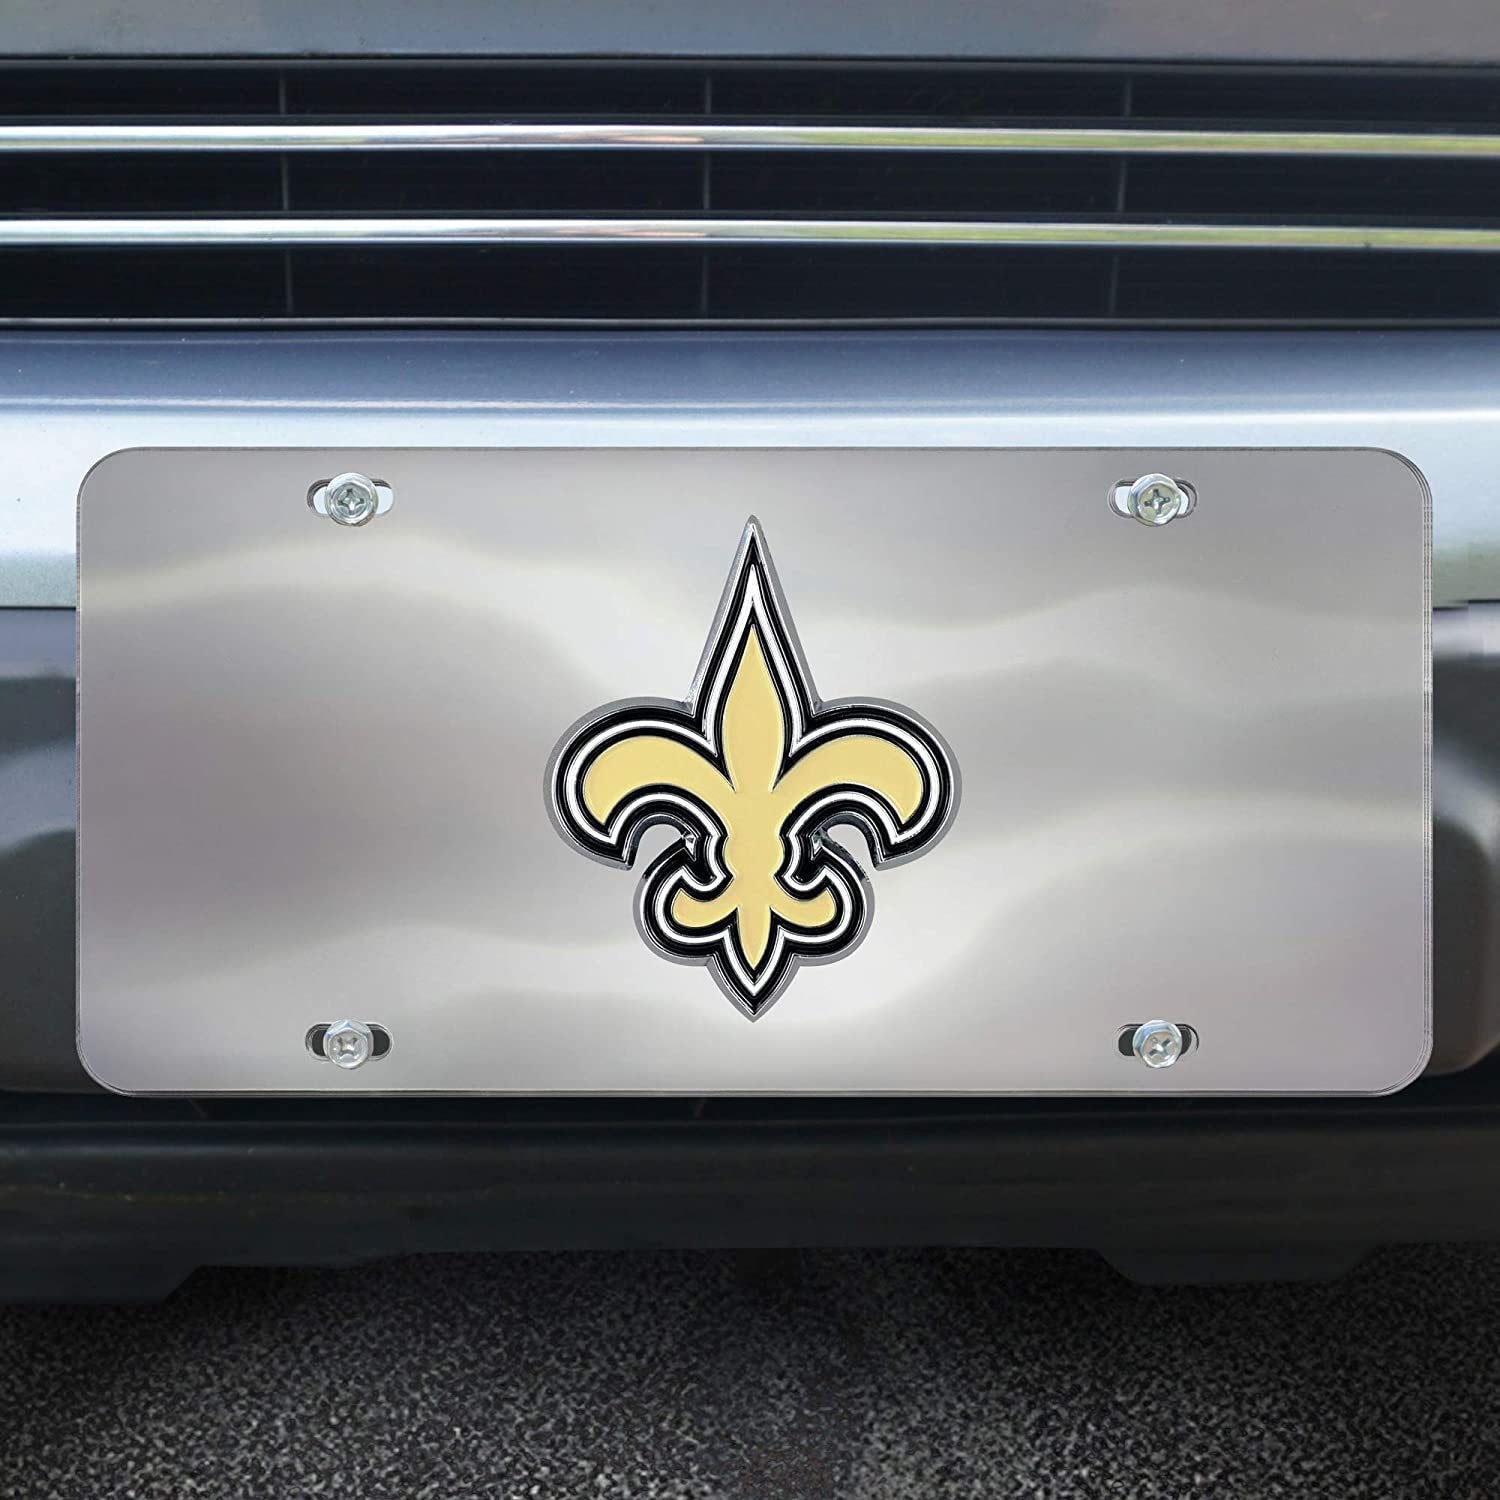 New Orleans Saints License Plate Tag, Premium Stainless Steel Diecast, Chrome, Raised Solid Metal Color Emblem, 6x12 Inch